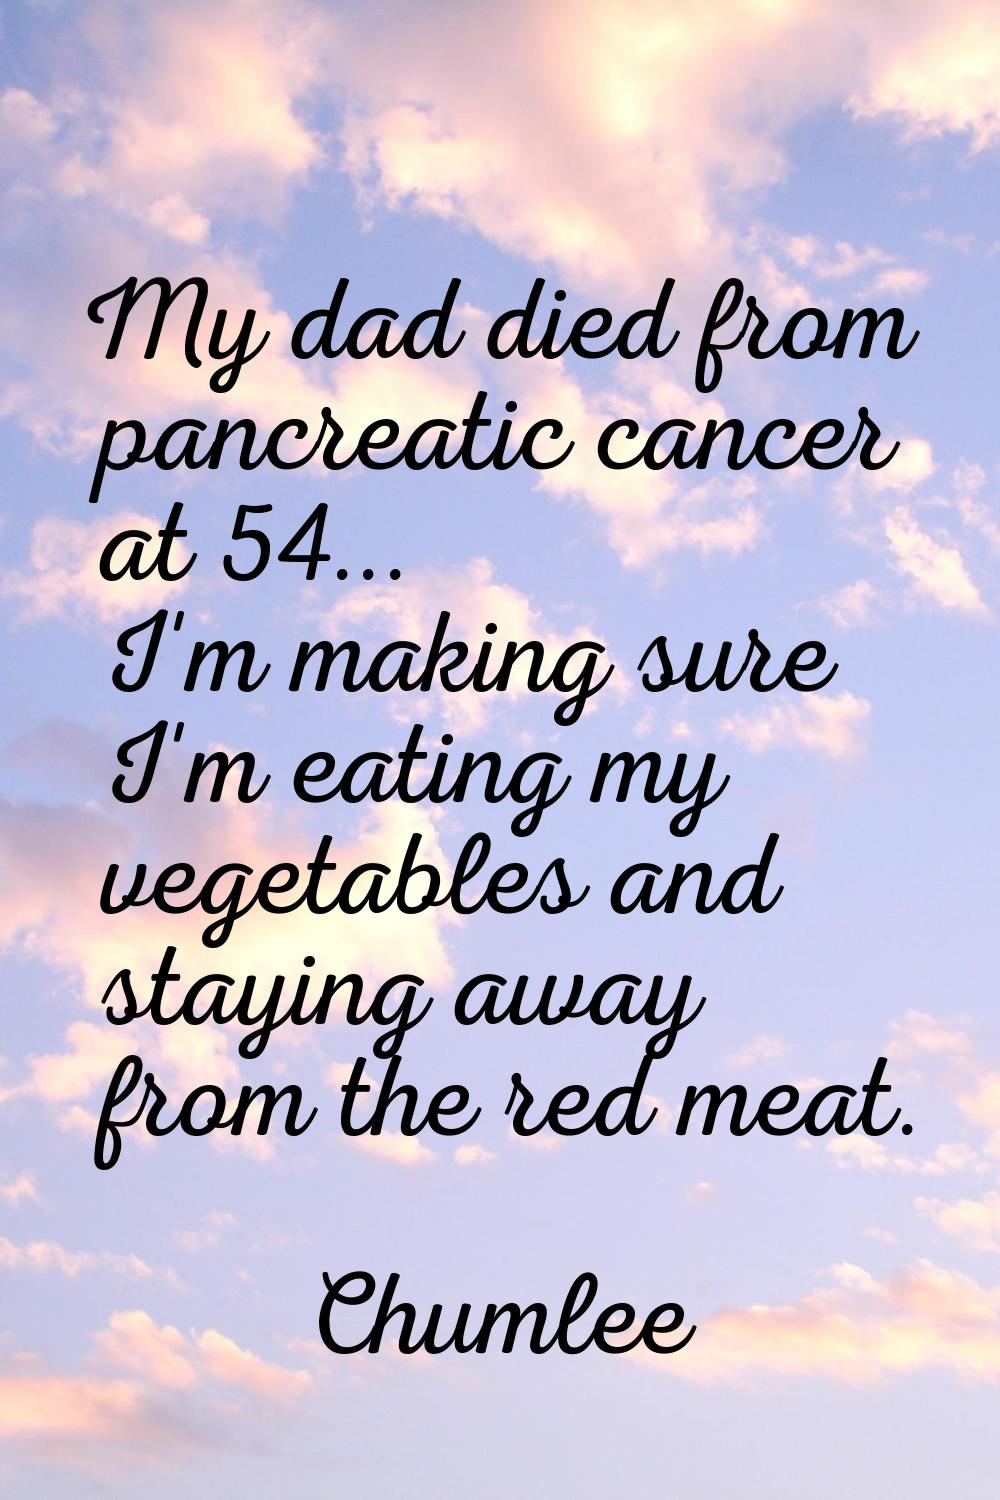 My dad died from pancreatic cancer at 54... I'm making sure I'm eating my vegetables and staying aw